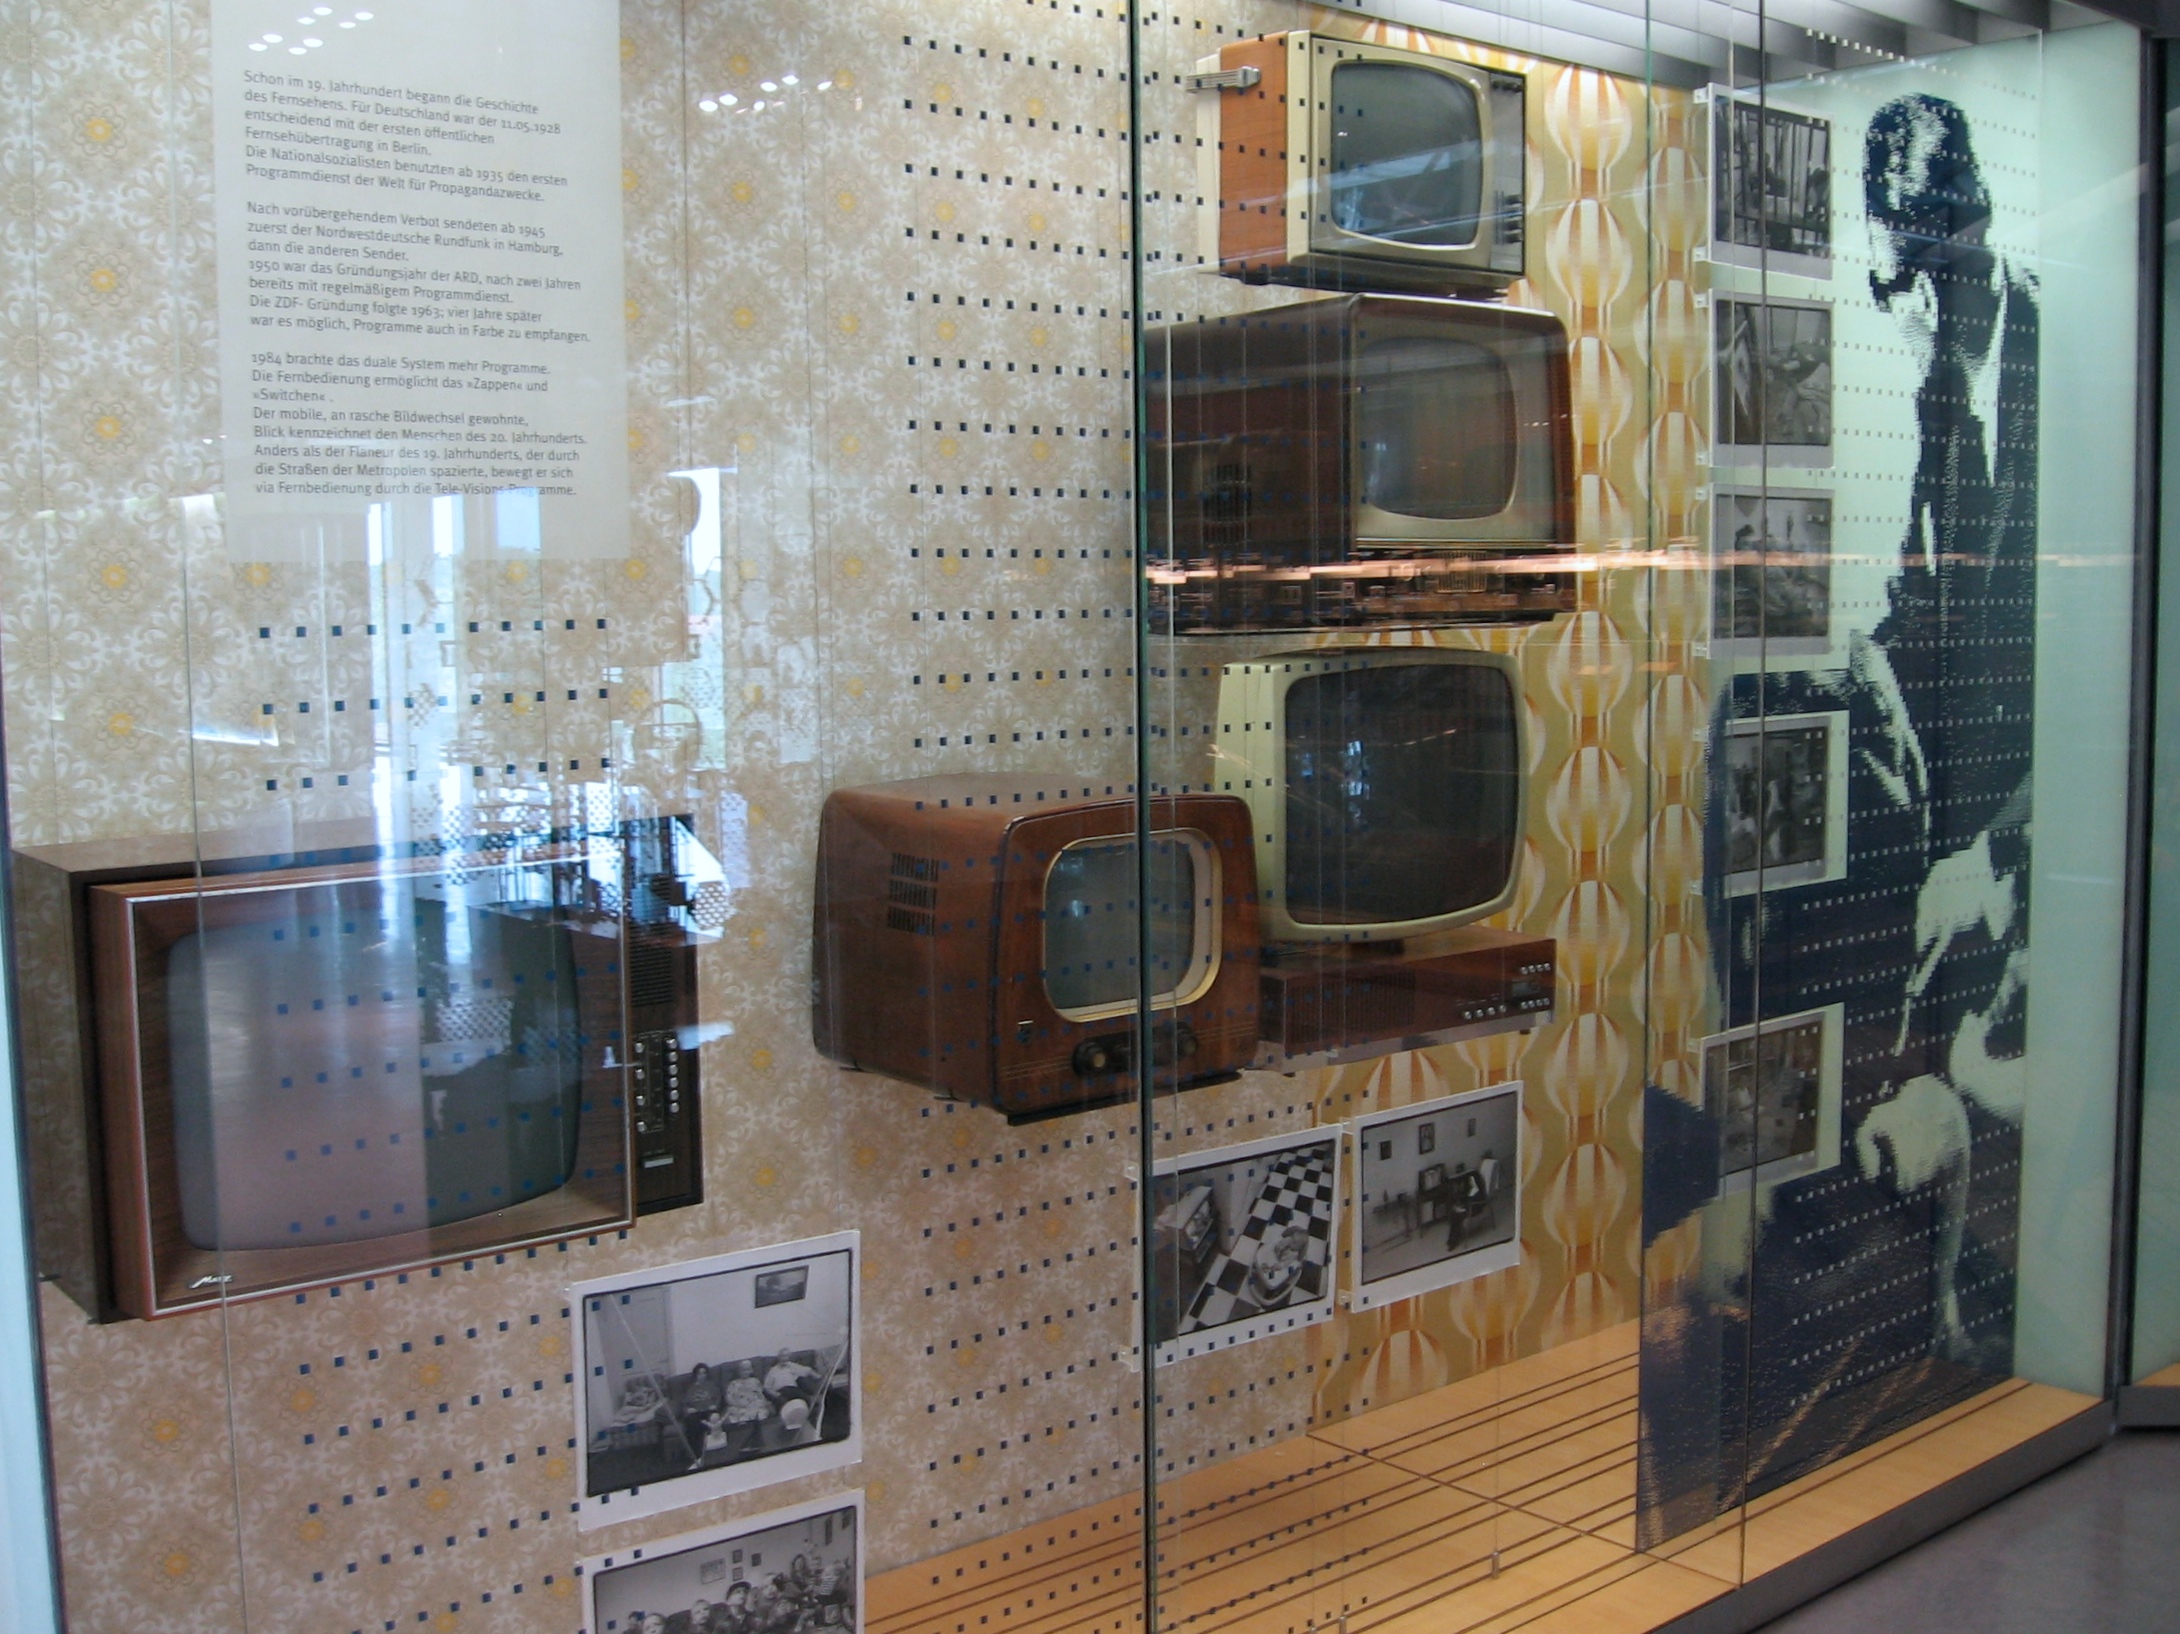 a display case filled with old televisions on top of glass